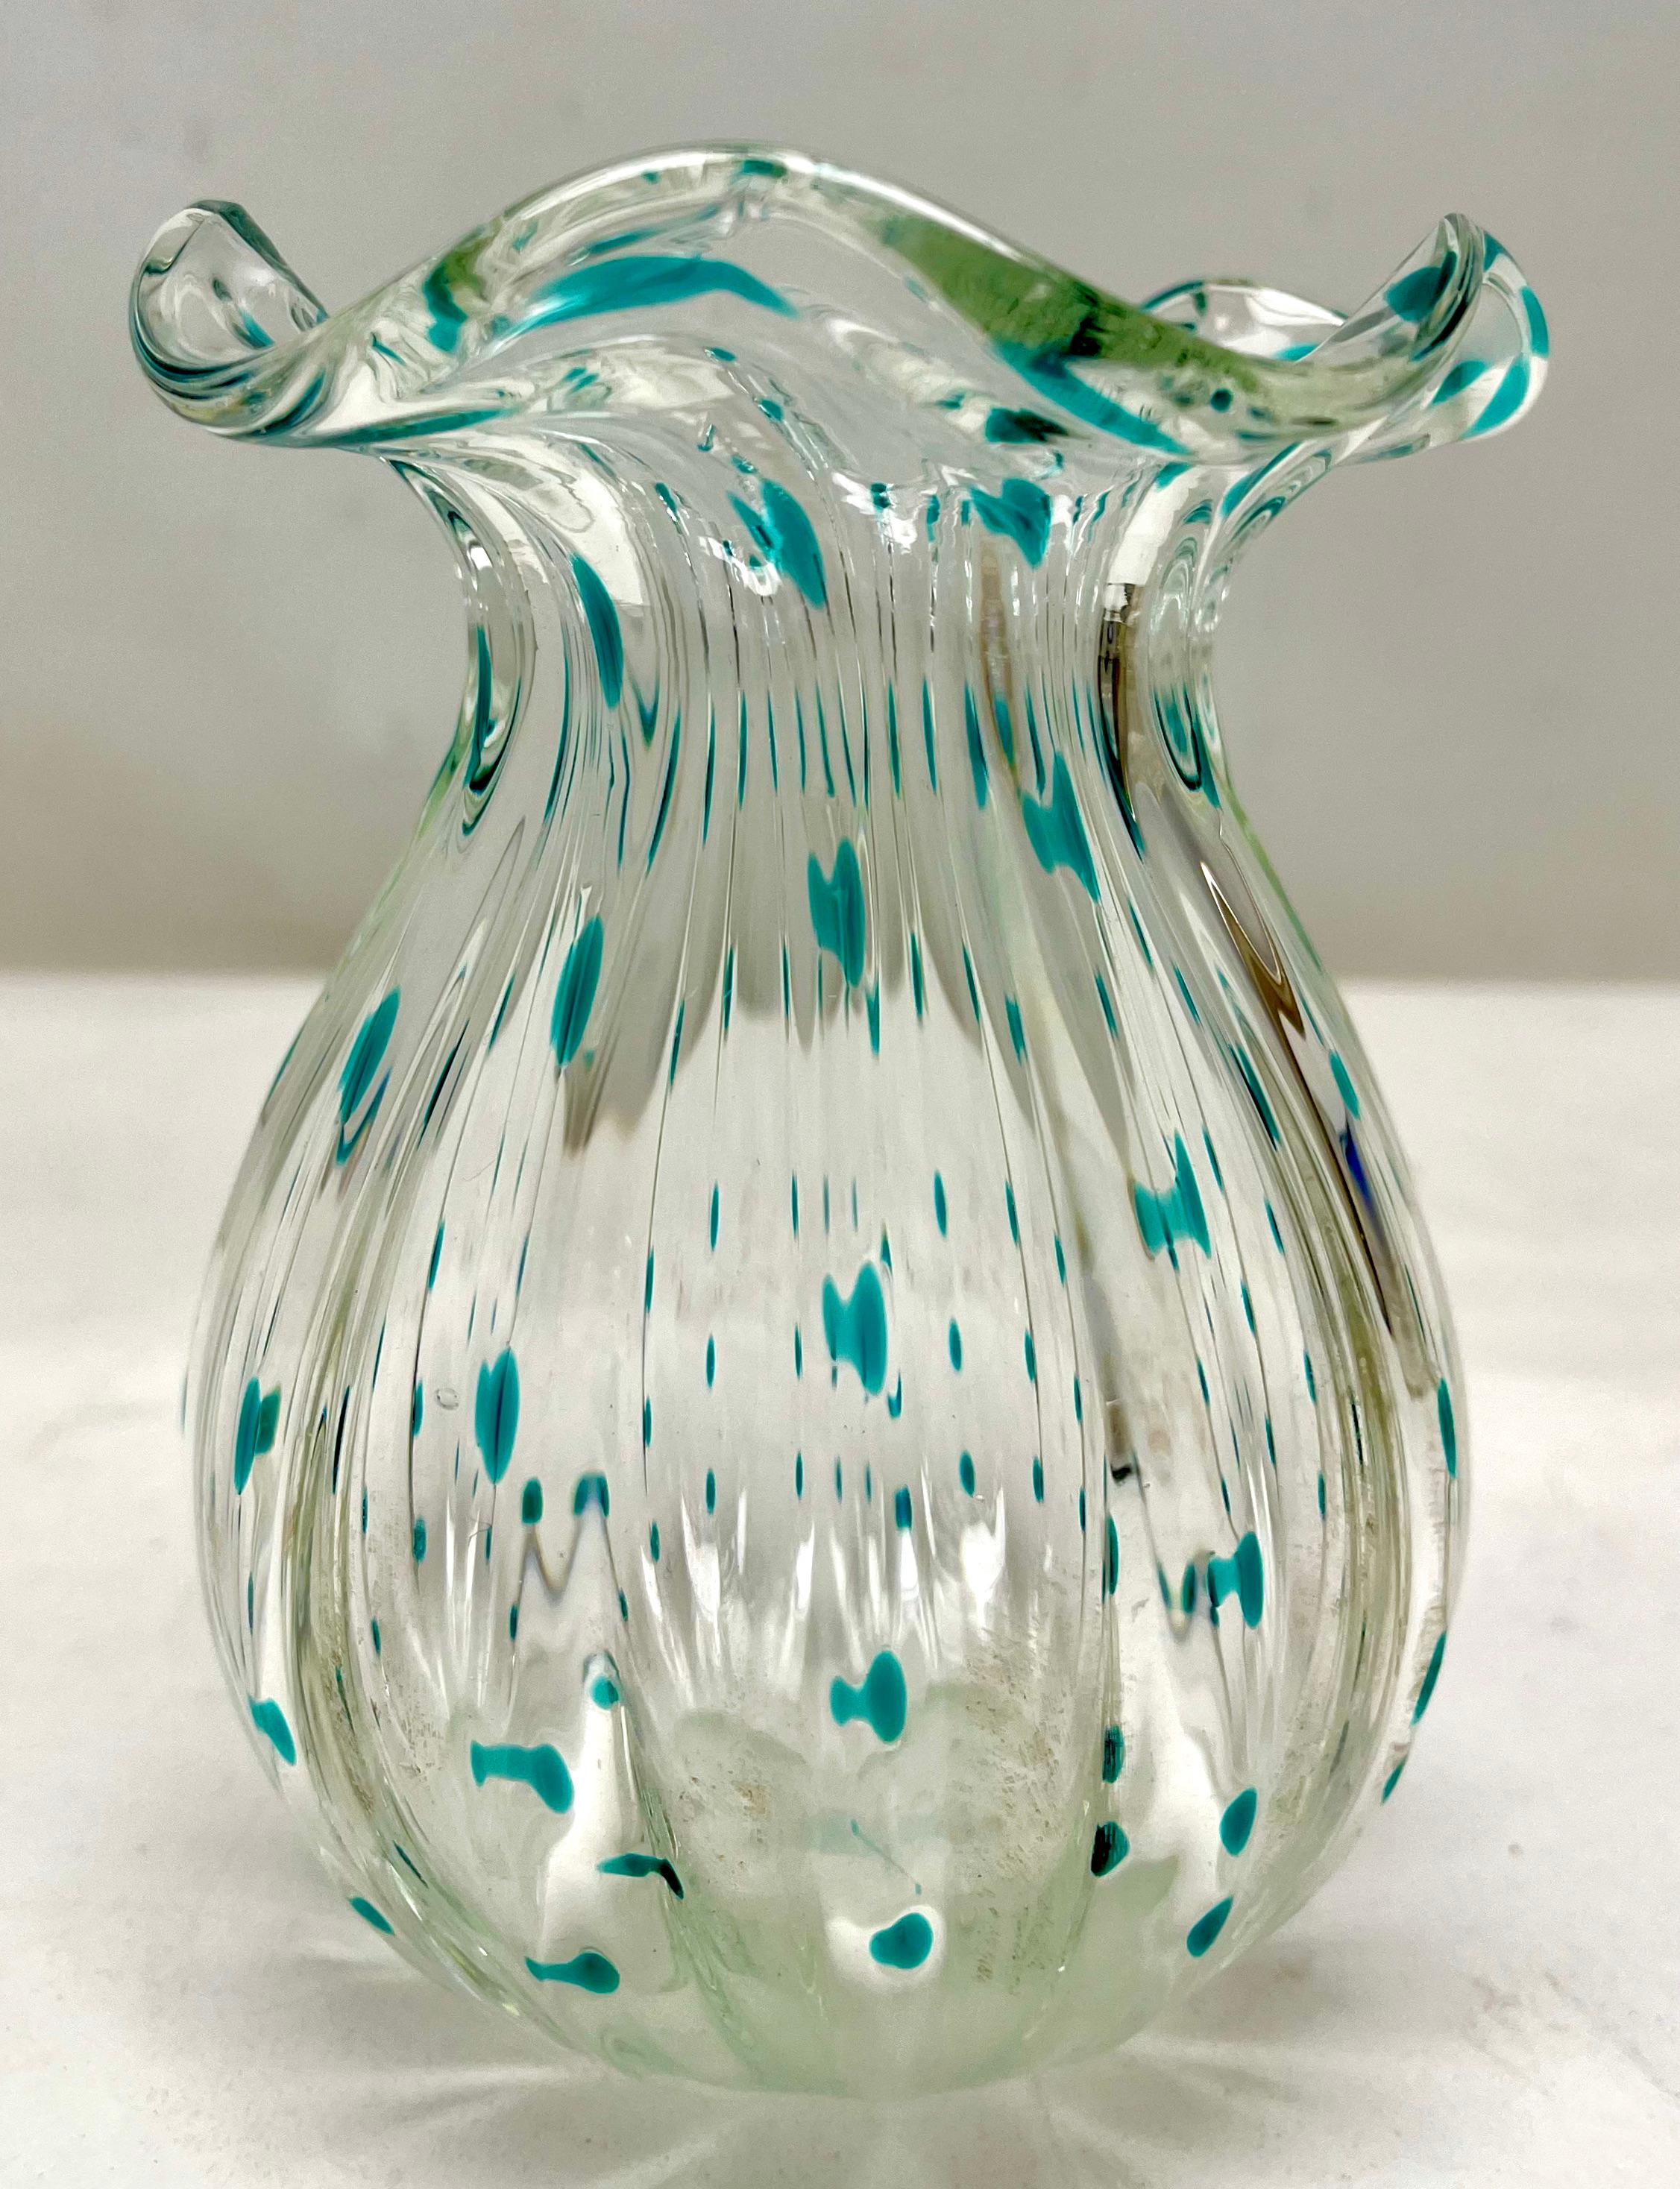 Loetz Art Nouveau vase with details of Colered dots glass 1930s
Beautifully decorated glass
Rare to find with original condition 

The piece is in good condition and a real beauty!
Photography fails to capture the simple elegant.





  




  